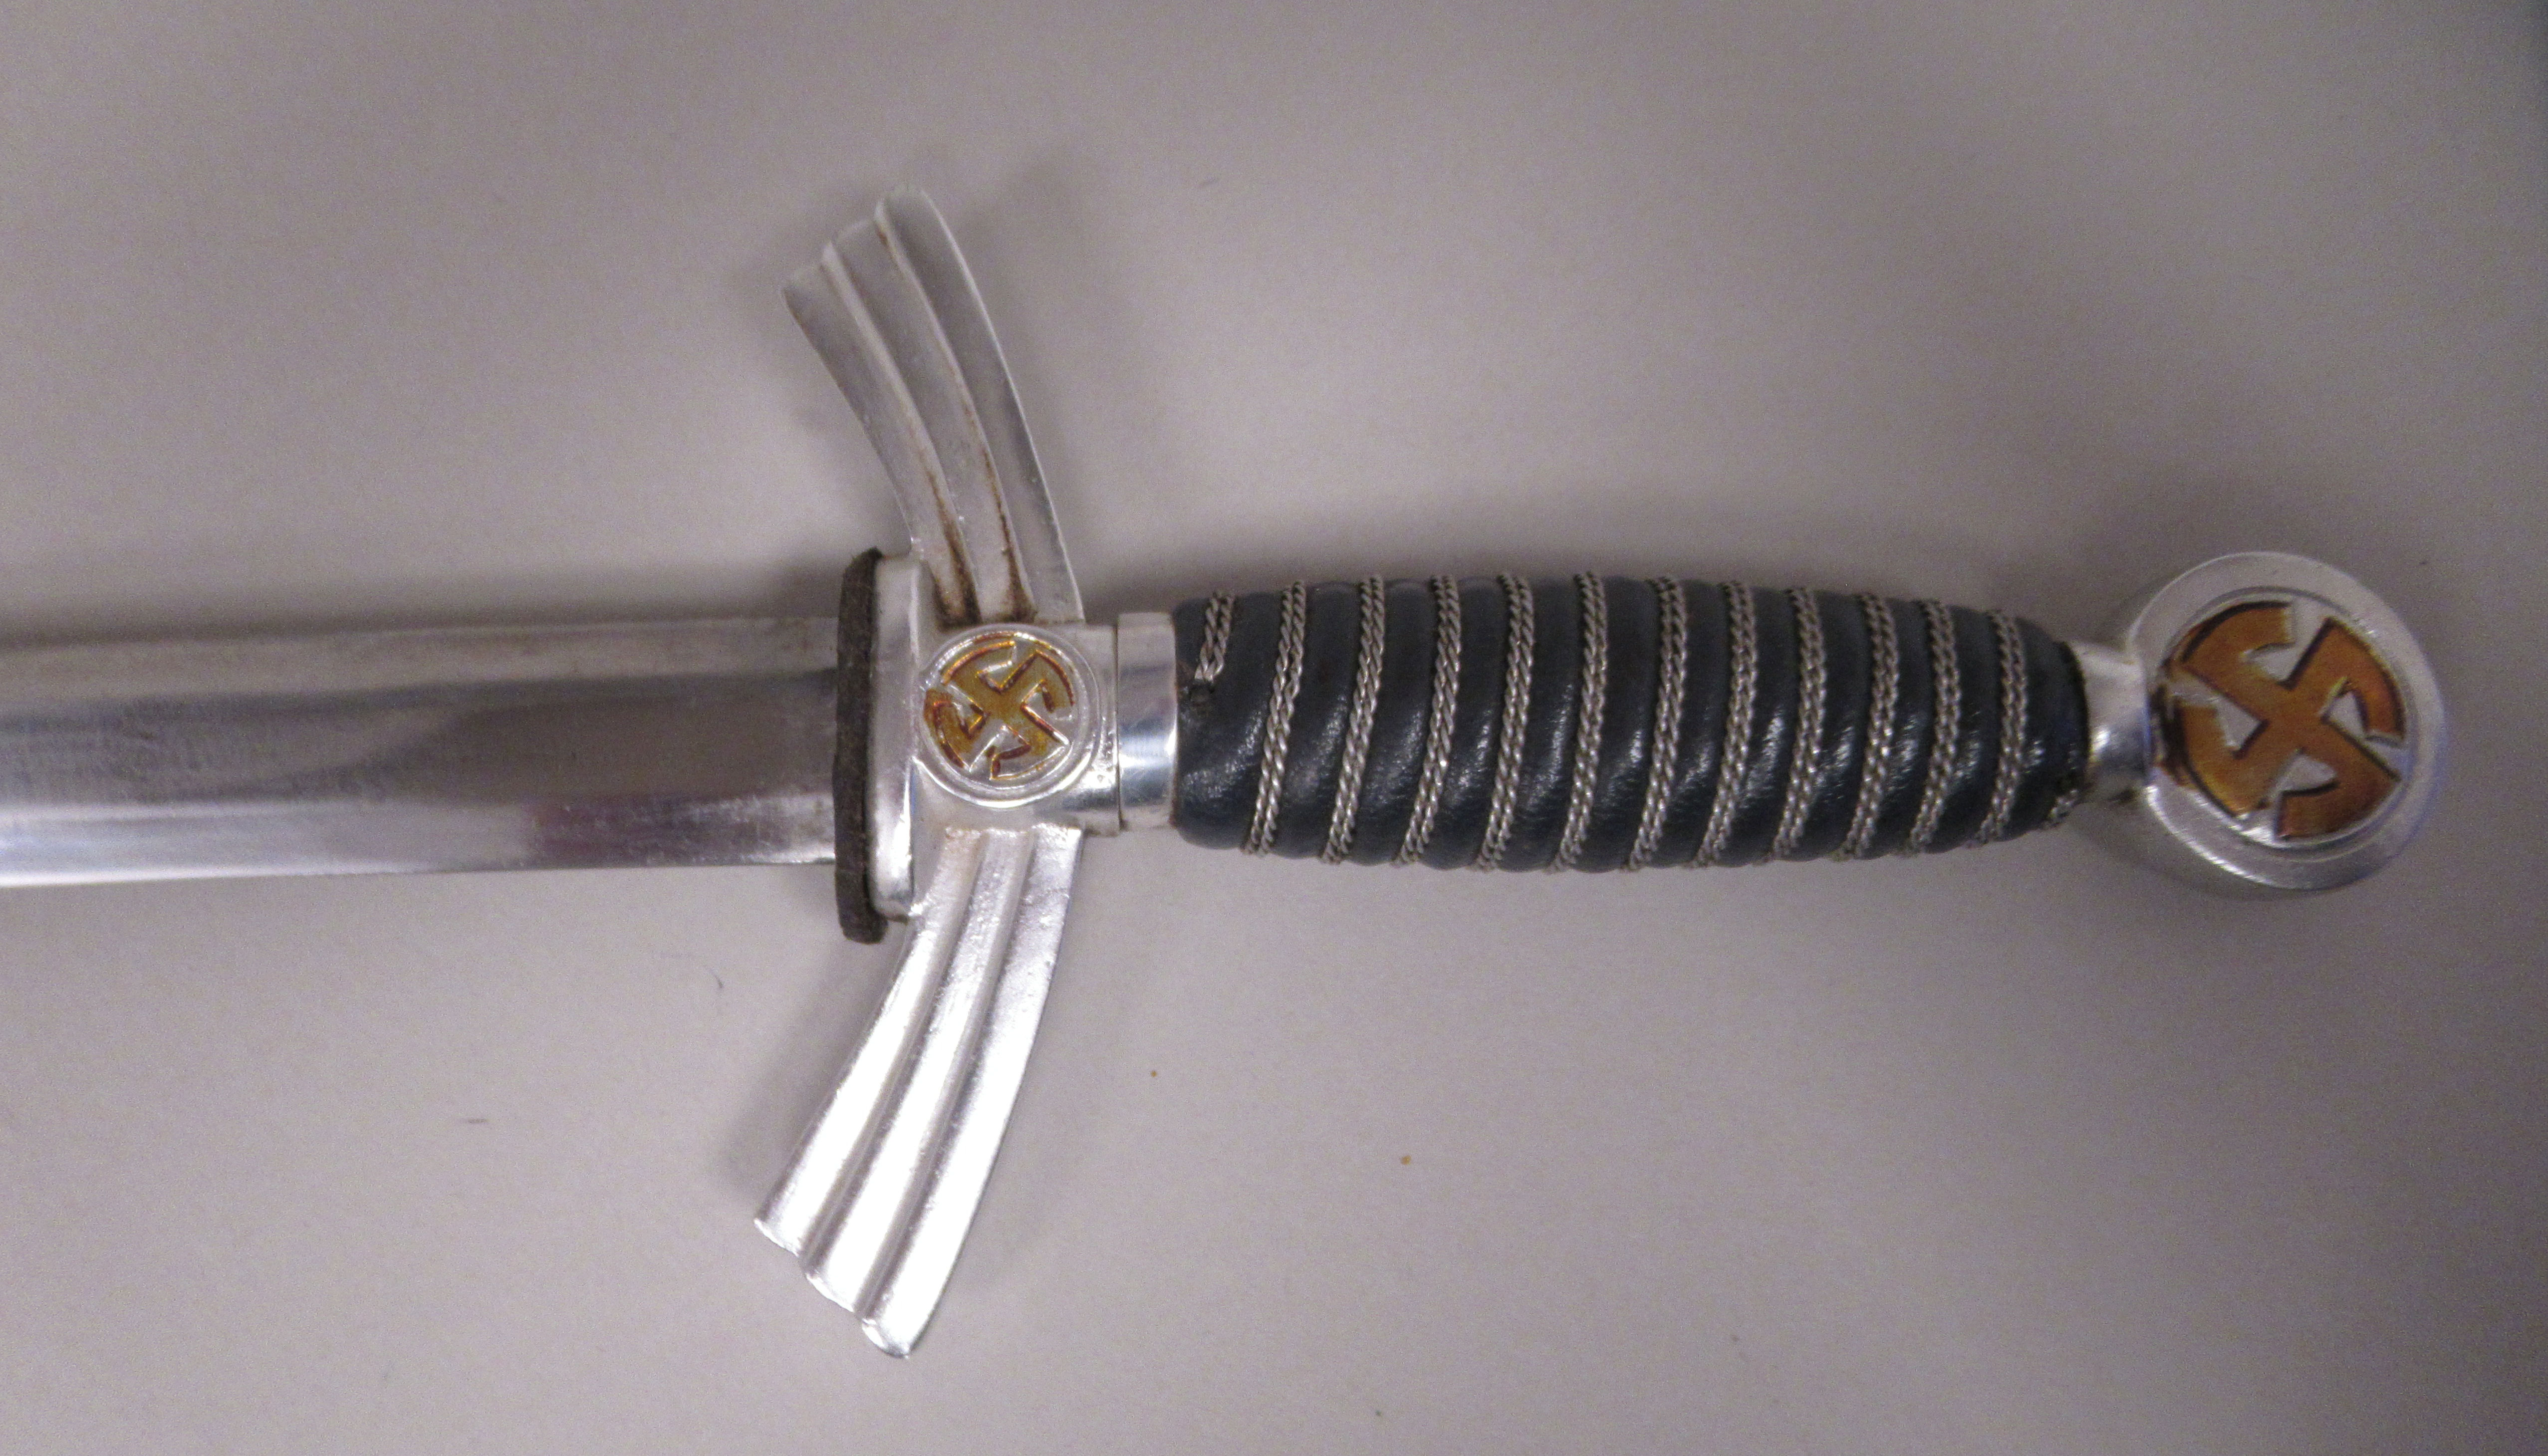 A German SS dress dagger with swastika emblems on the pommel and hilt and a woven wire band - Image 5 of 7